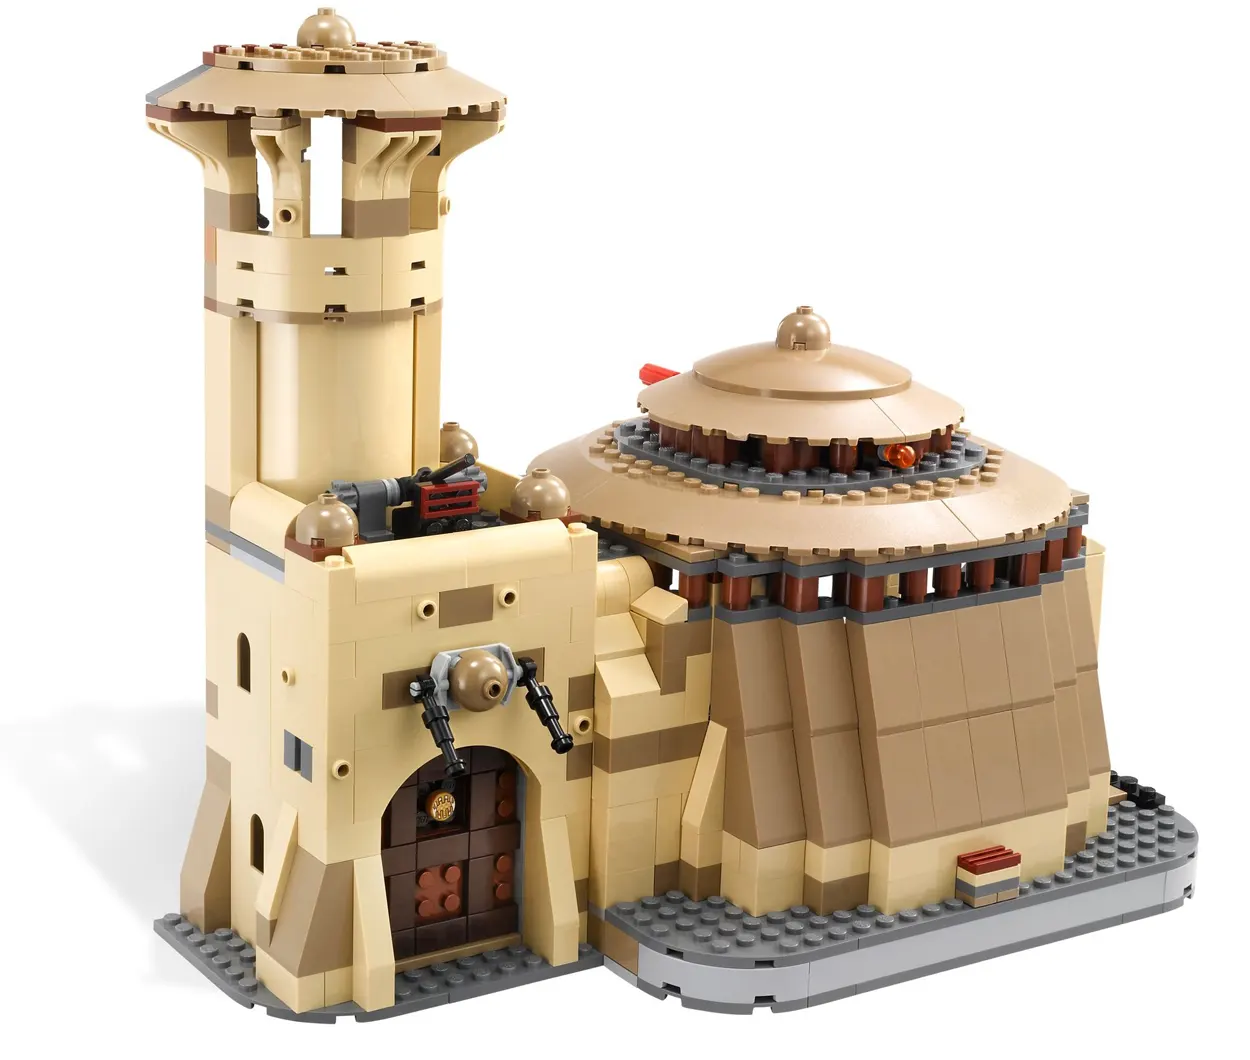 LEGO Star Wars 75326 Boba Fett's Palace Revealed on SNS | New set for March 1st 2022